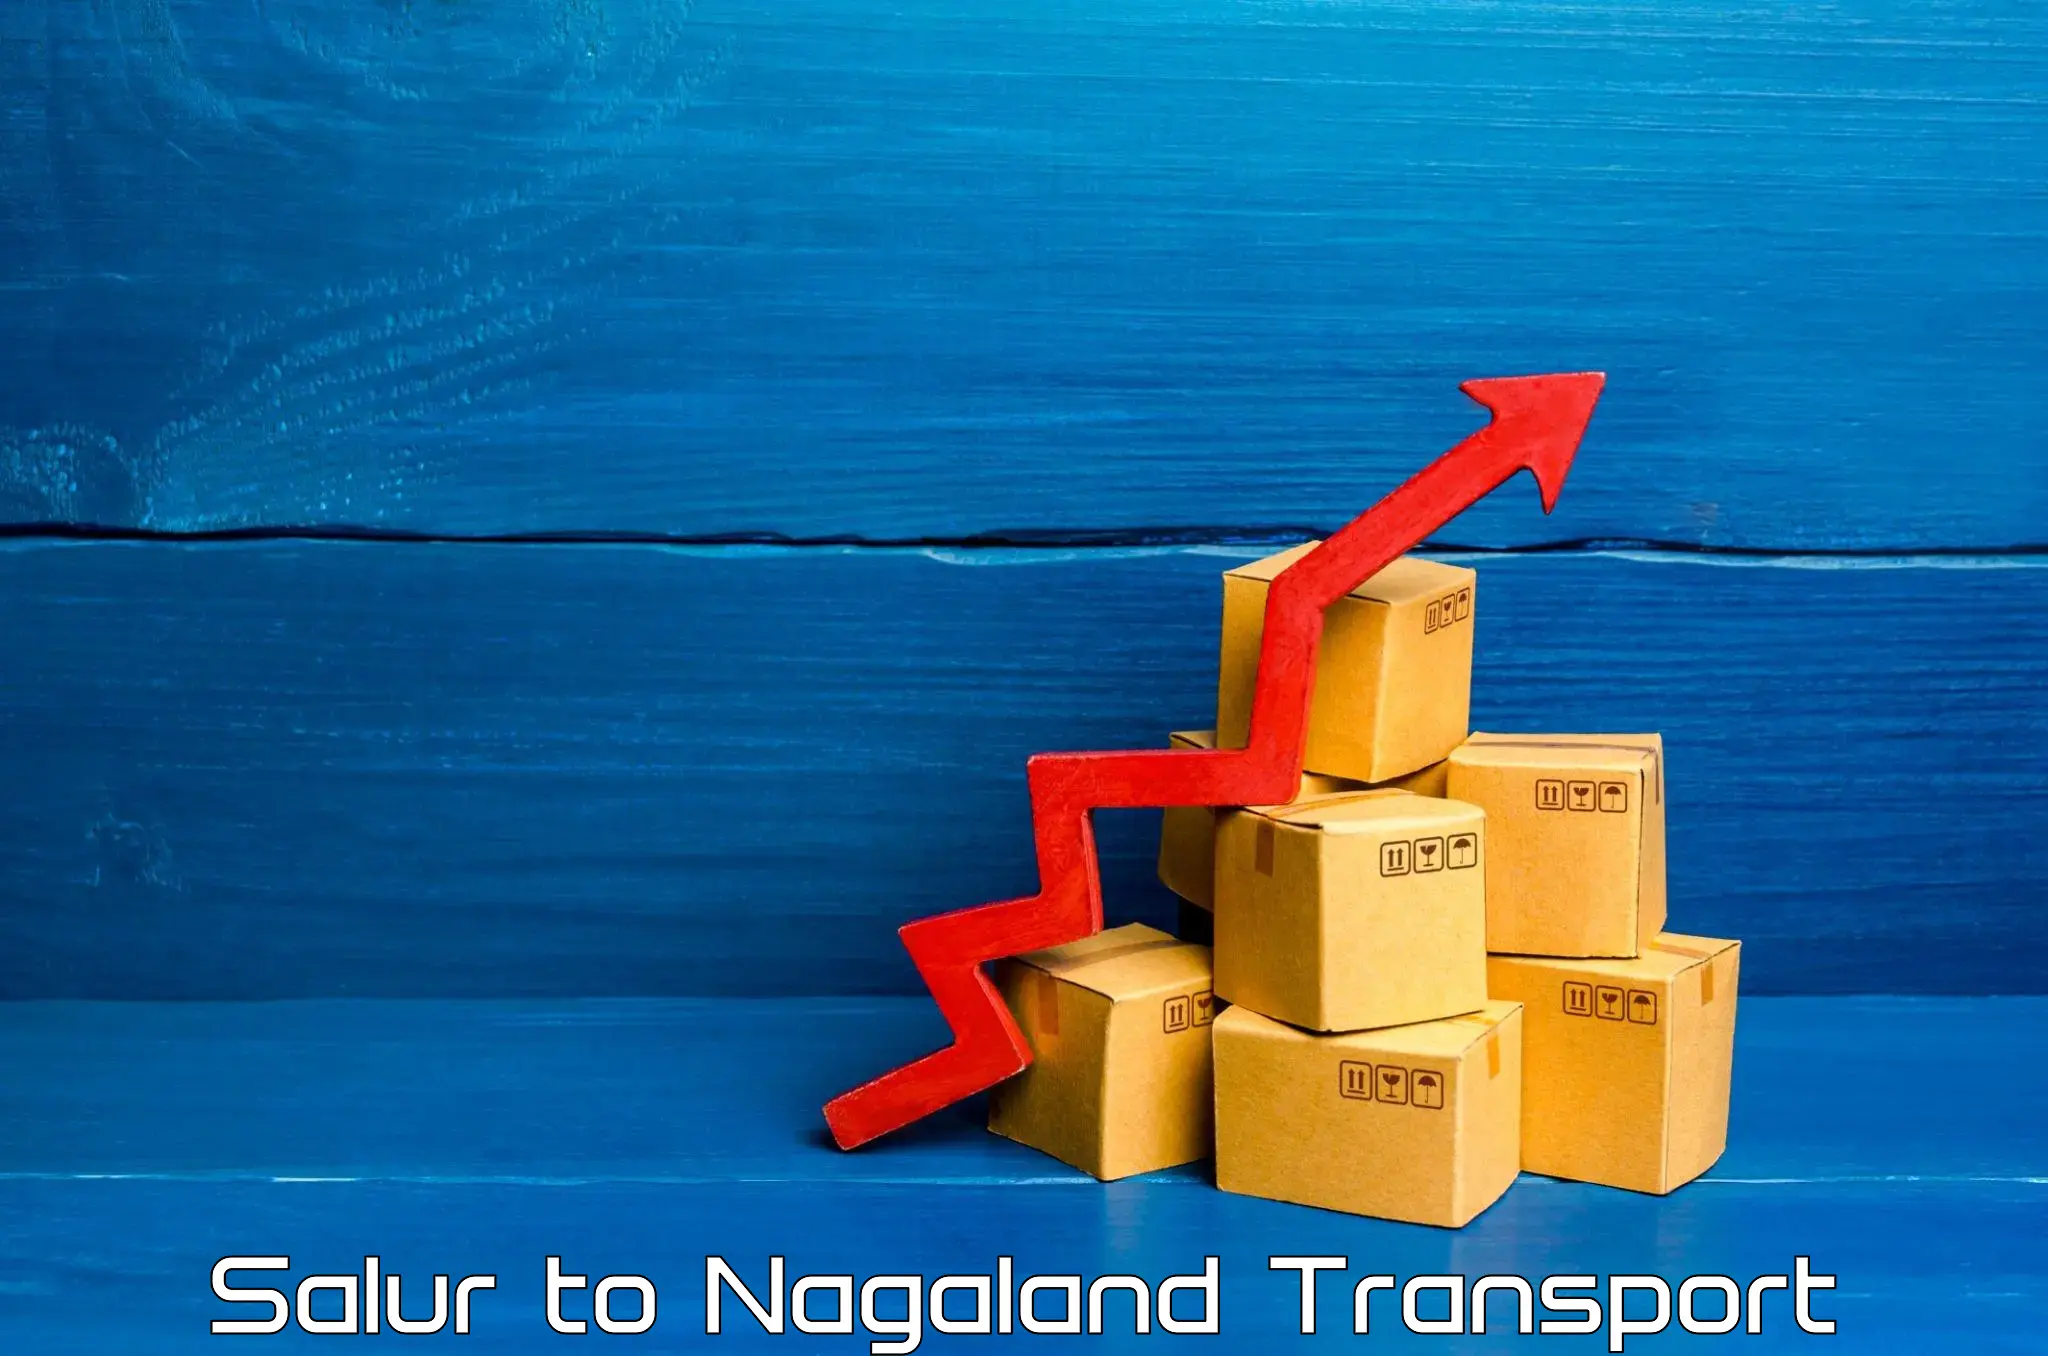 Transport bike from one state to another Salur to Nagaland